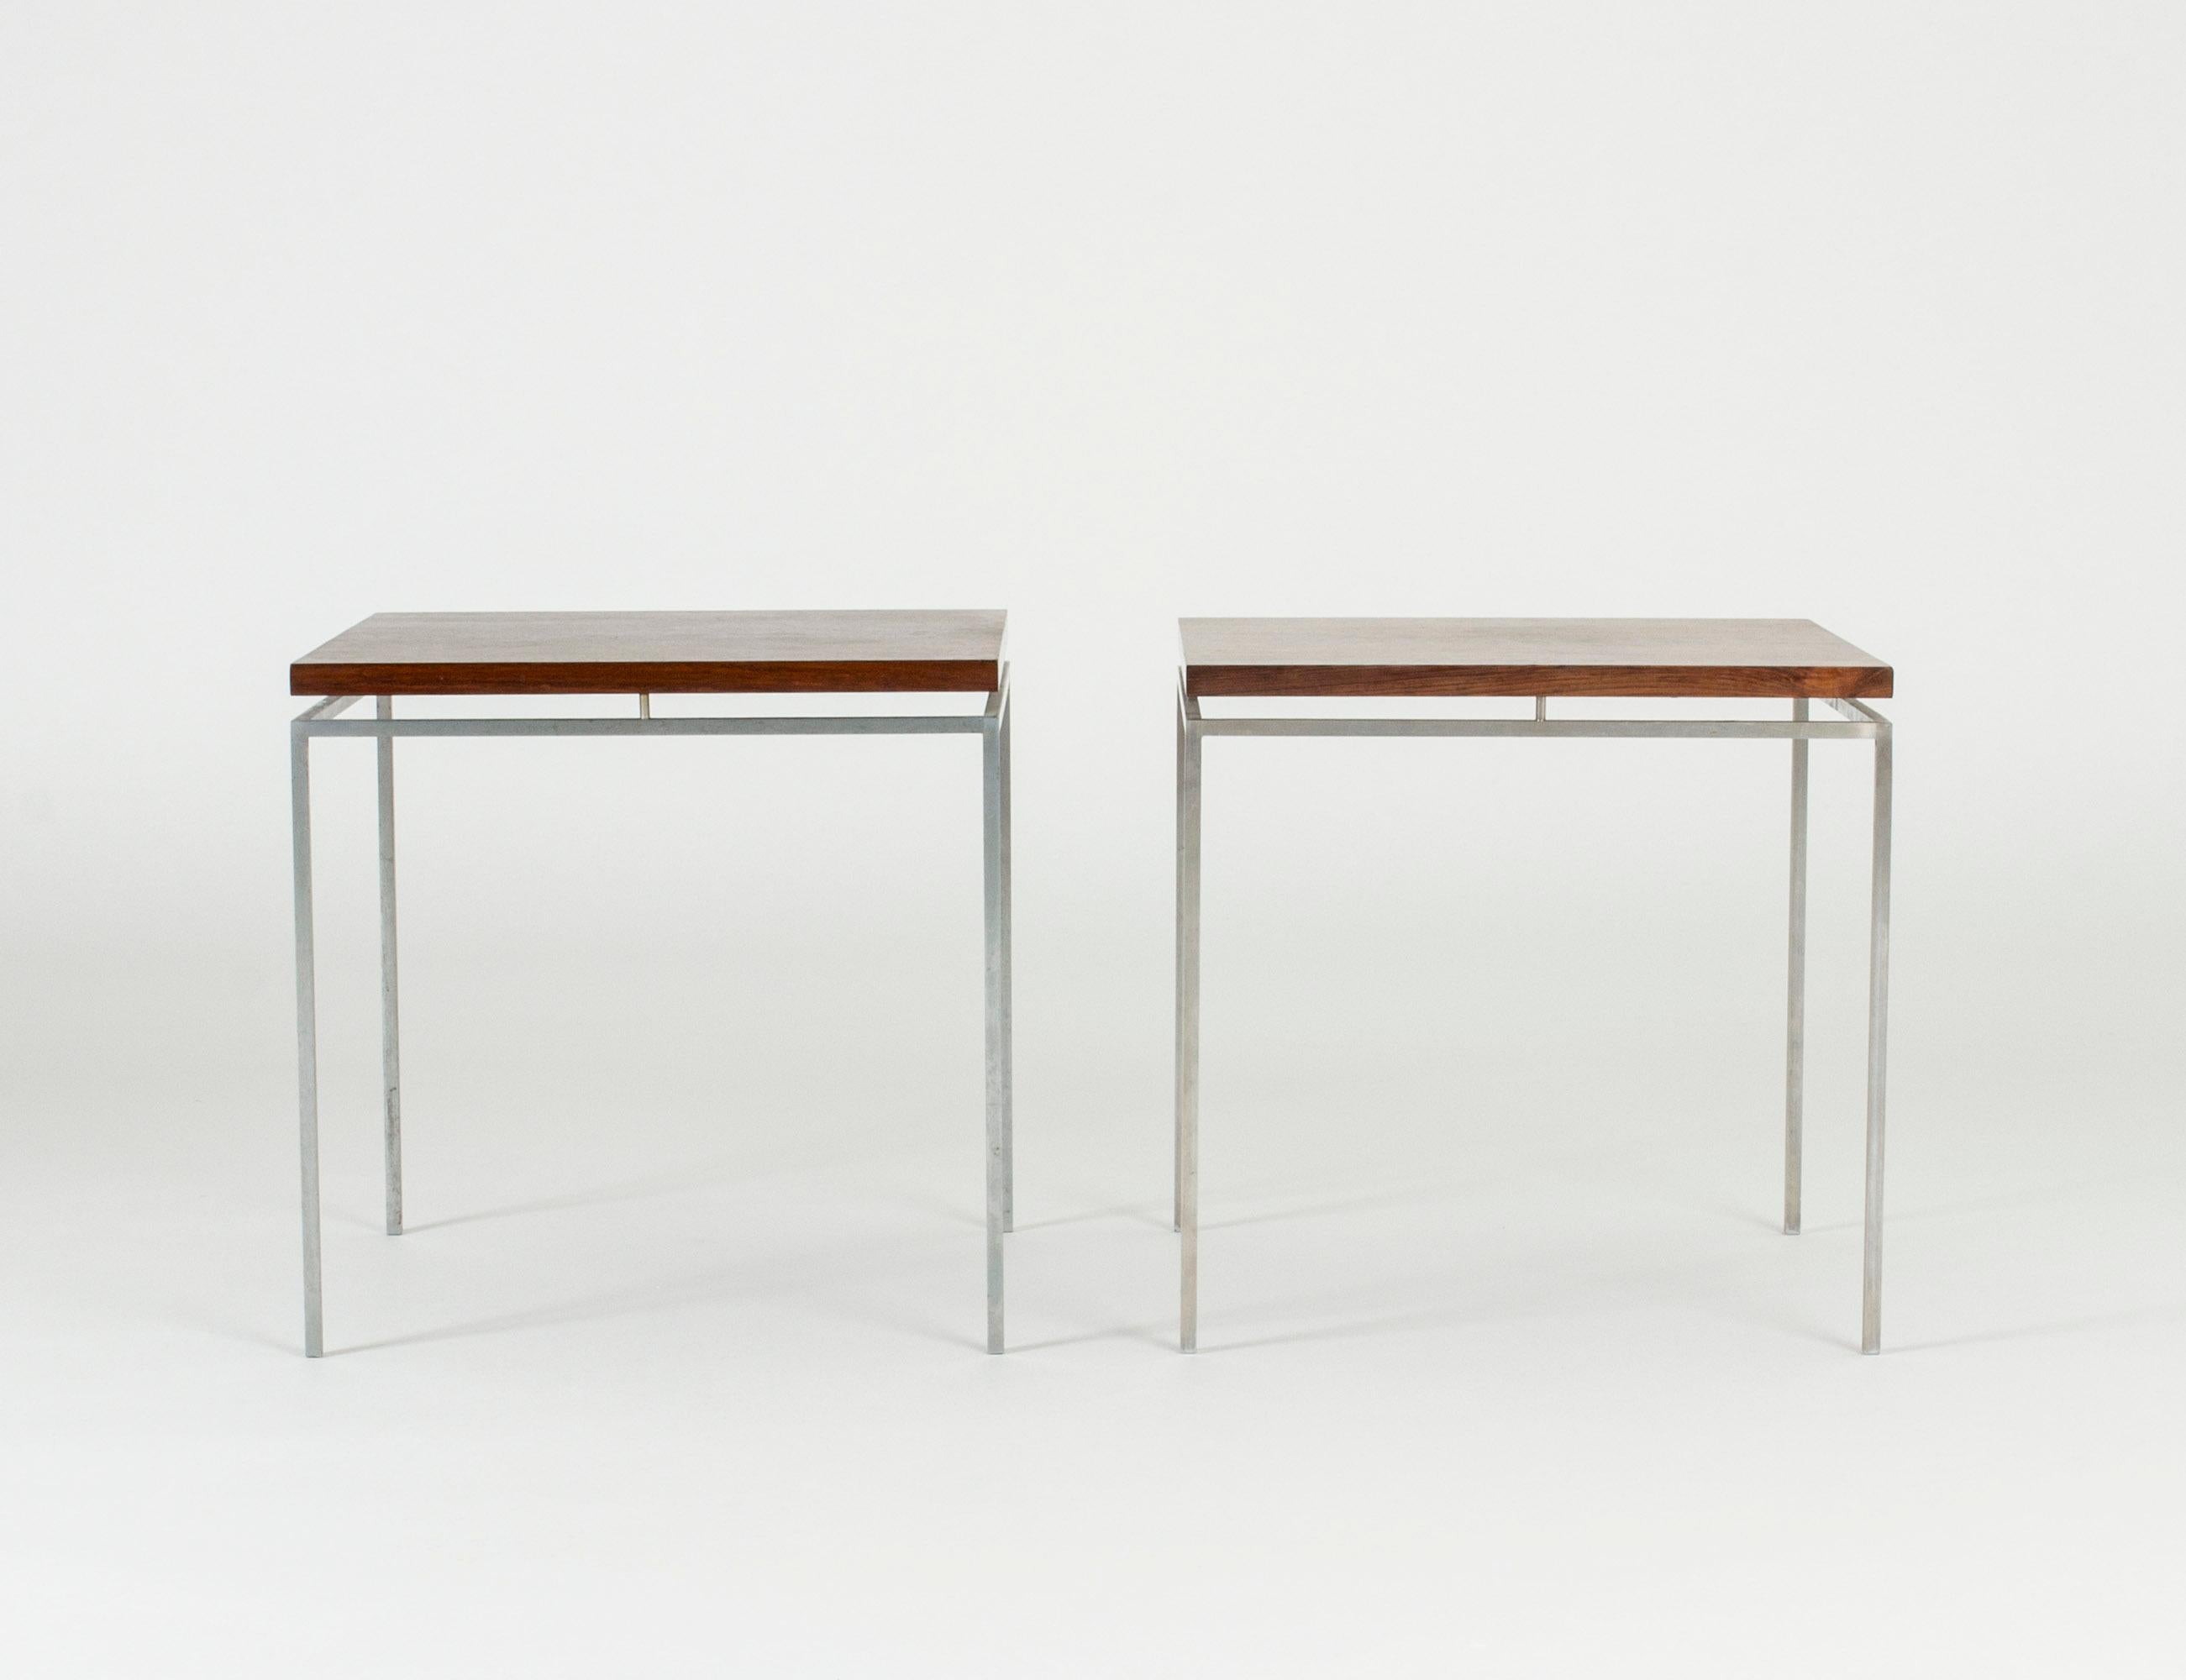 Pair of Minimalist side tables by Knud Joos, made in an angular, open design. Rosewood table tops and slender steel legs.